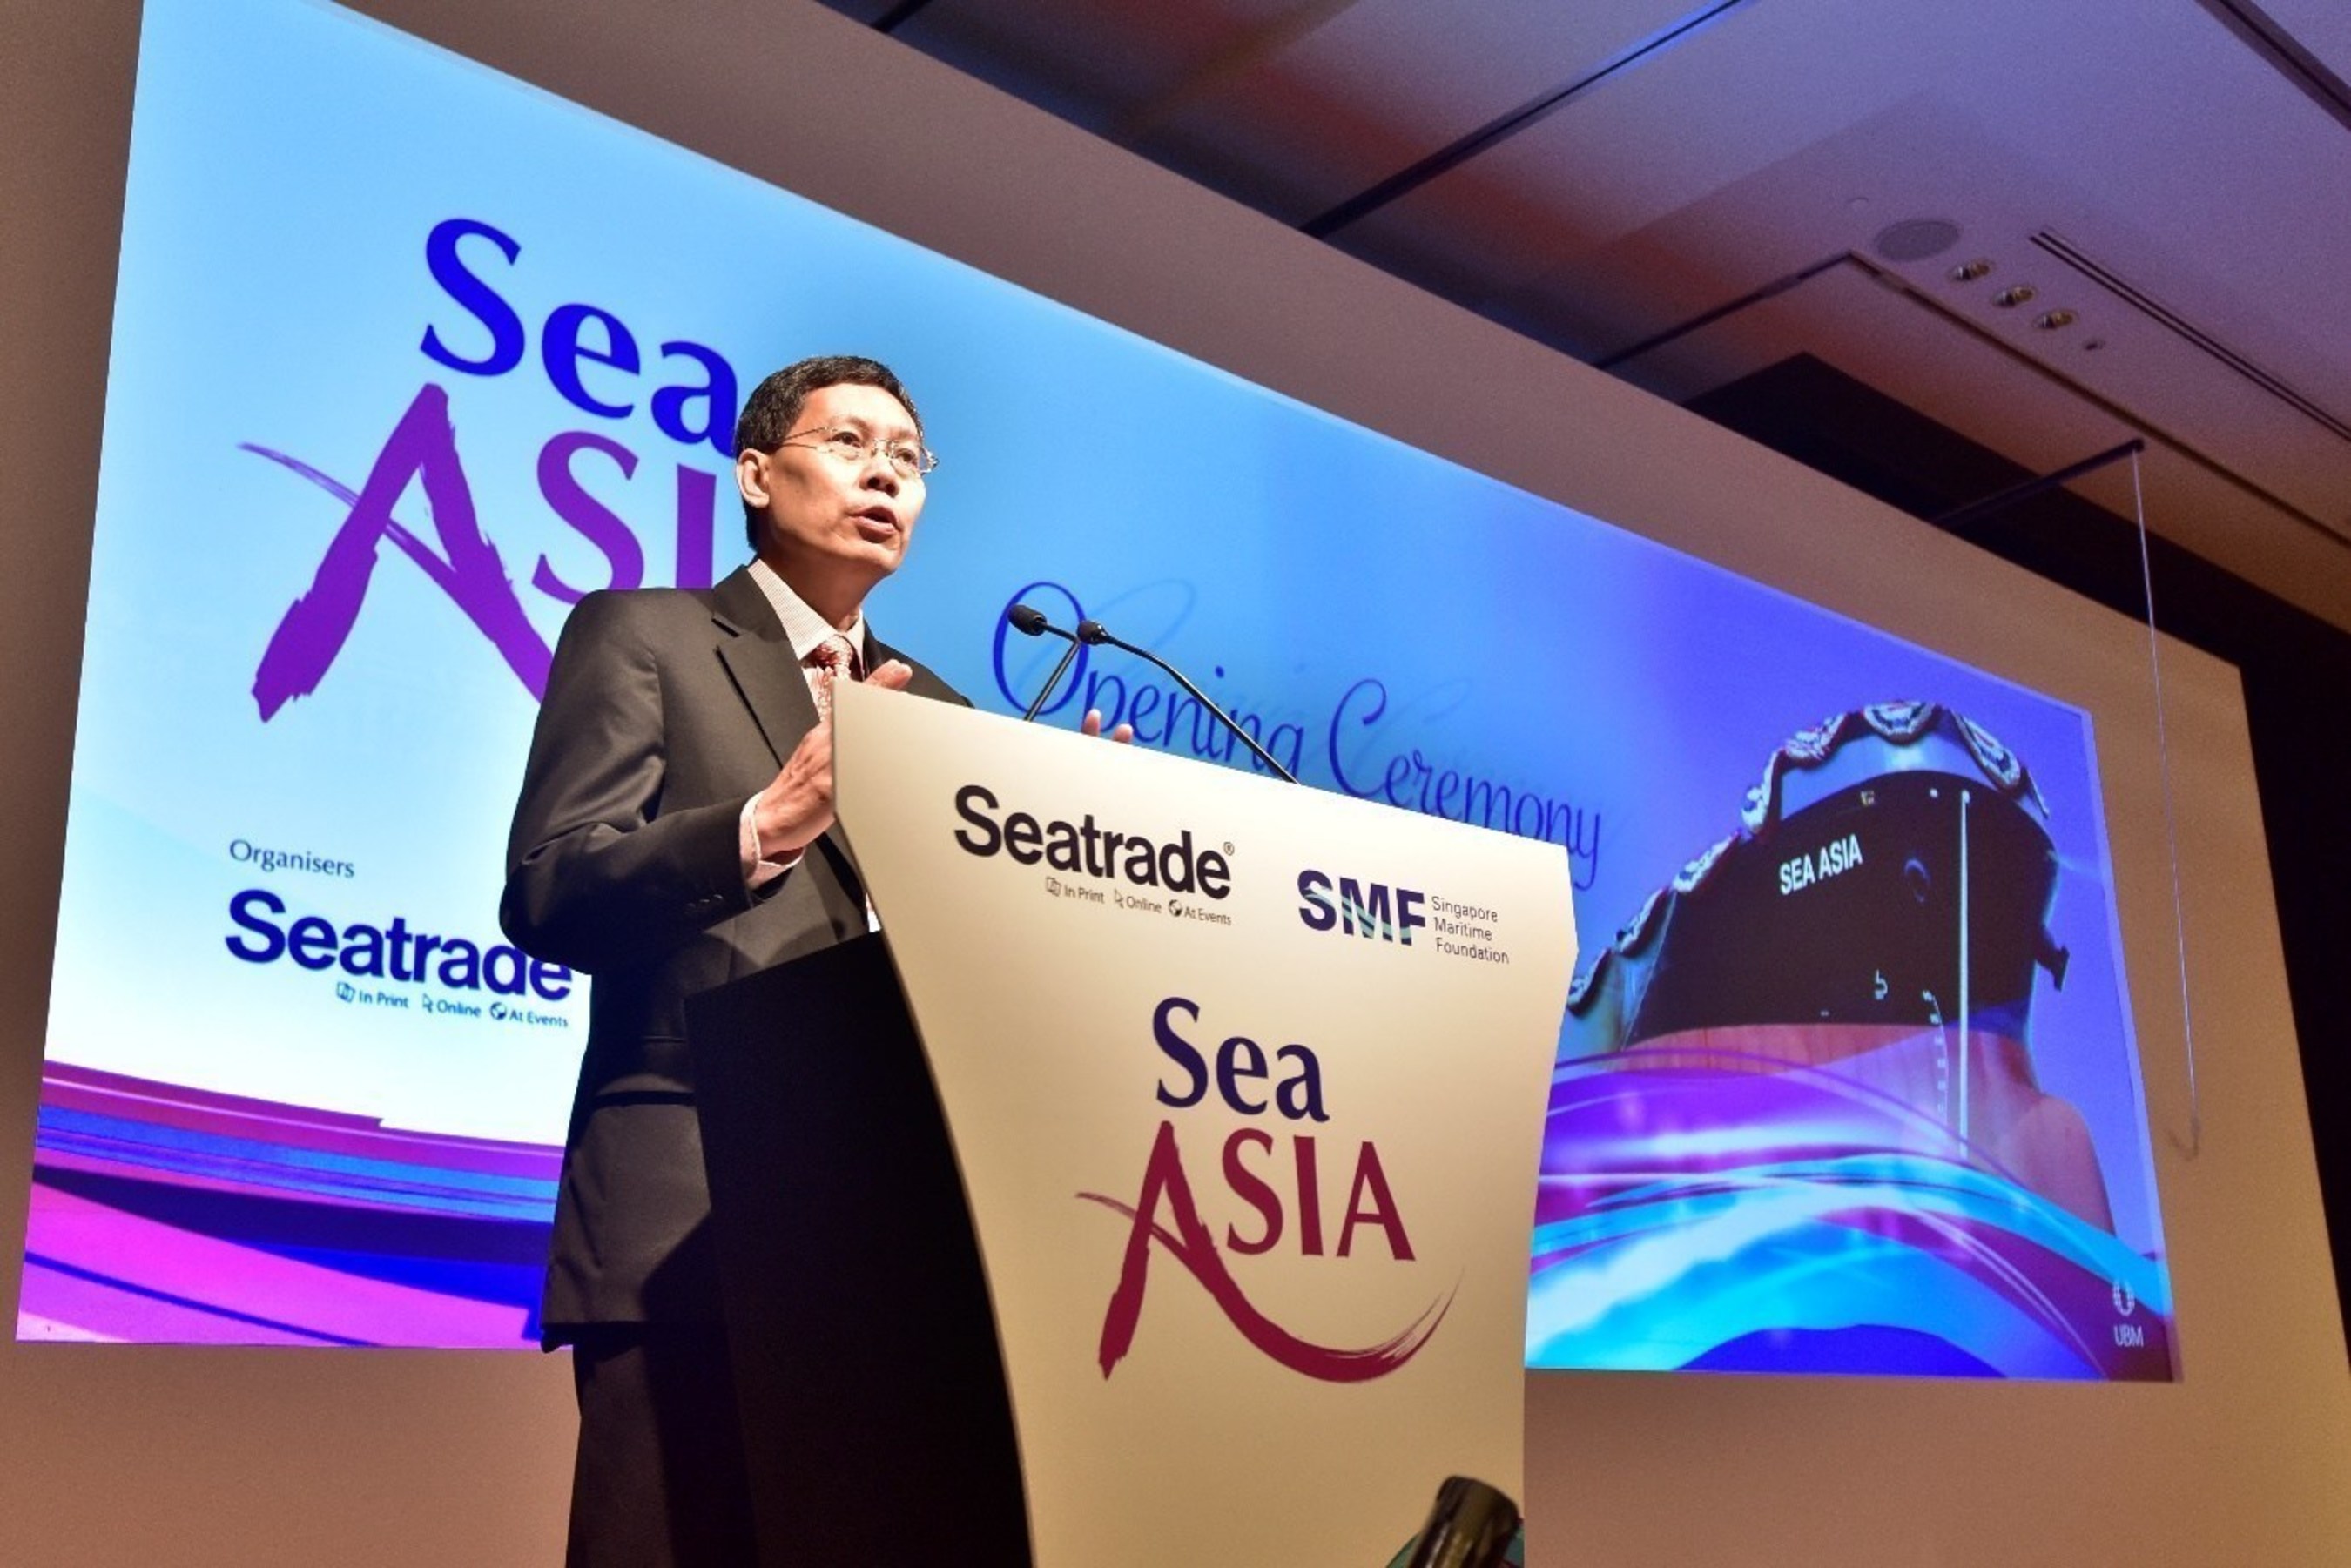 Minister for Transport and Second Minister for Defence Mr Lui Tuck Yew speaking at the Sea Asia 2015 opening ceremony.